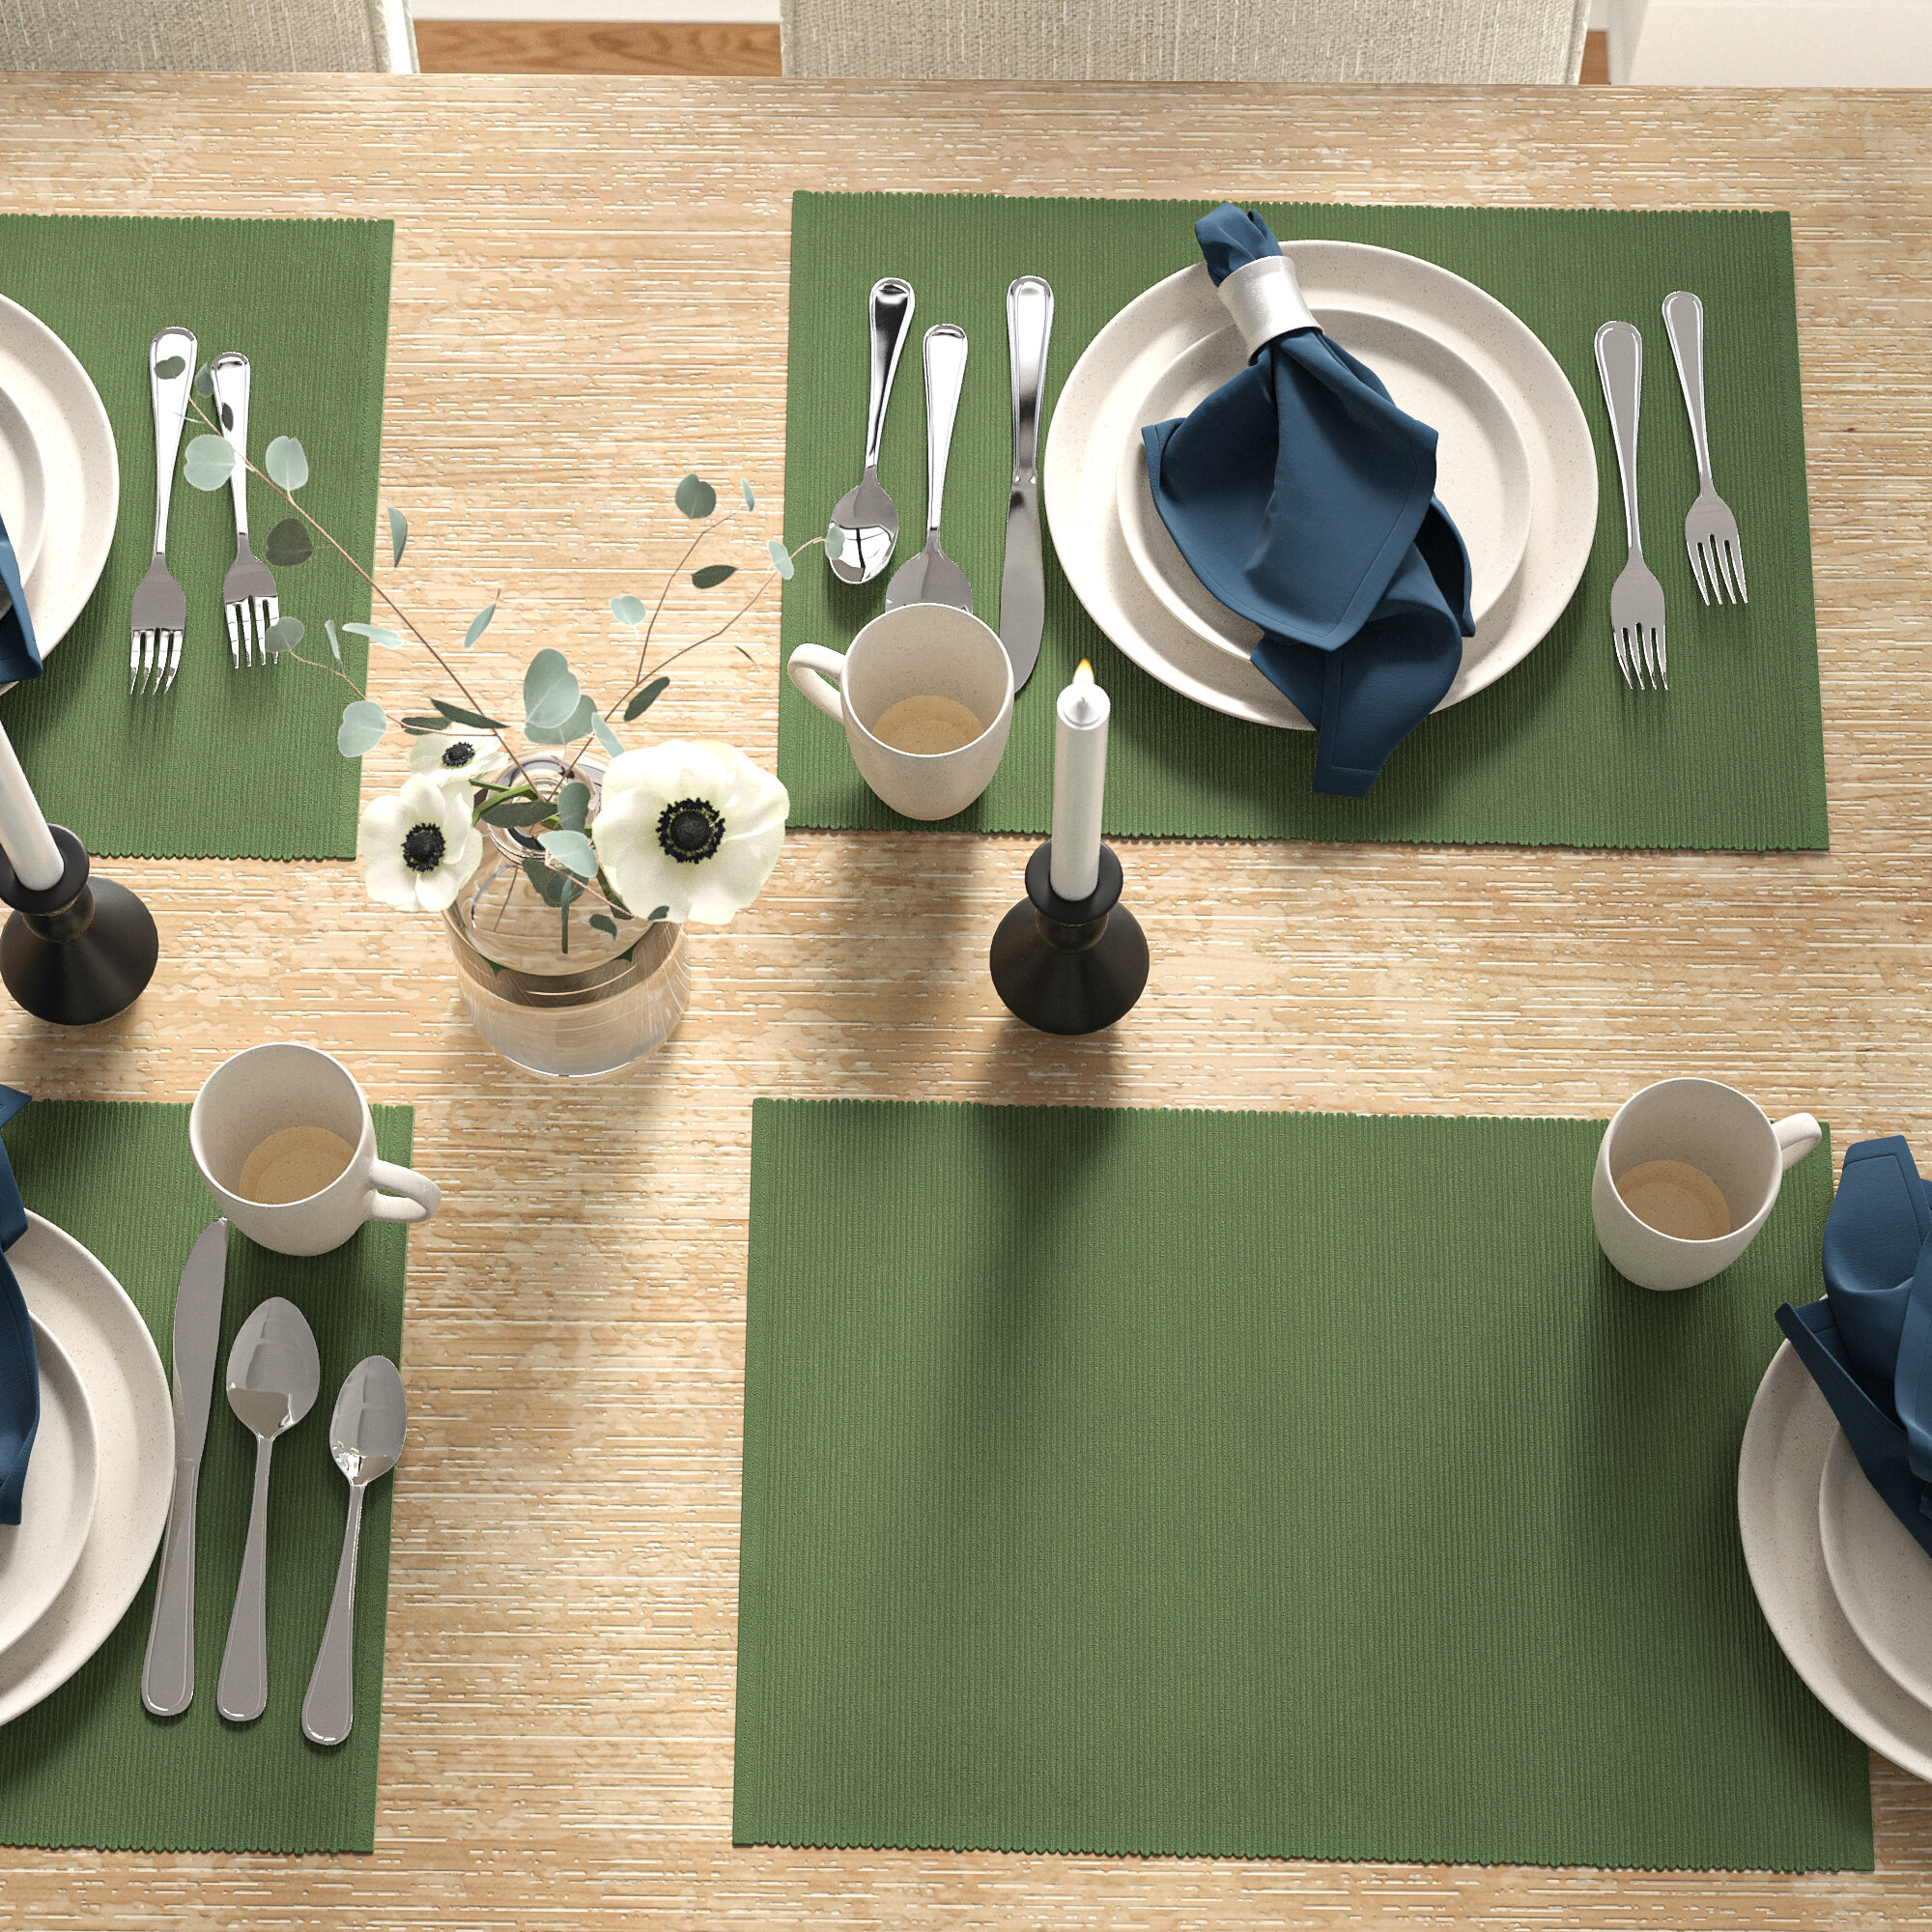 Places Mats at Home and Picnics Black Color One-sided Soft Comfortable Dinner Cloth Set of 2